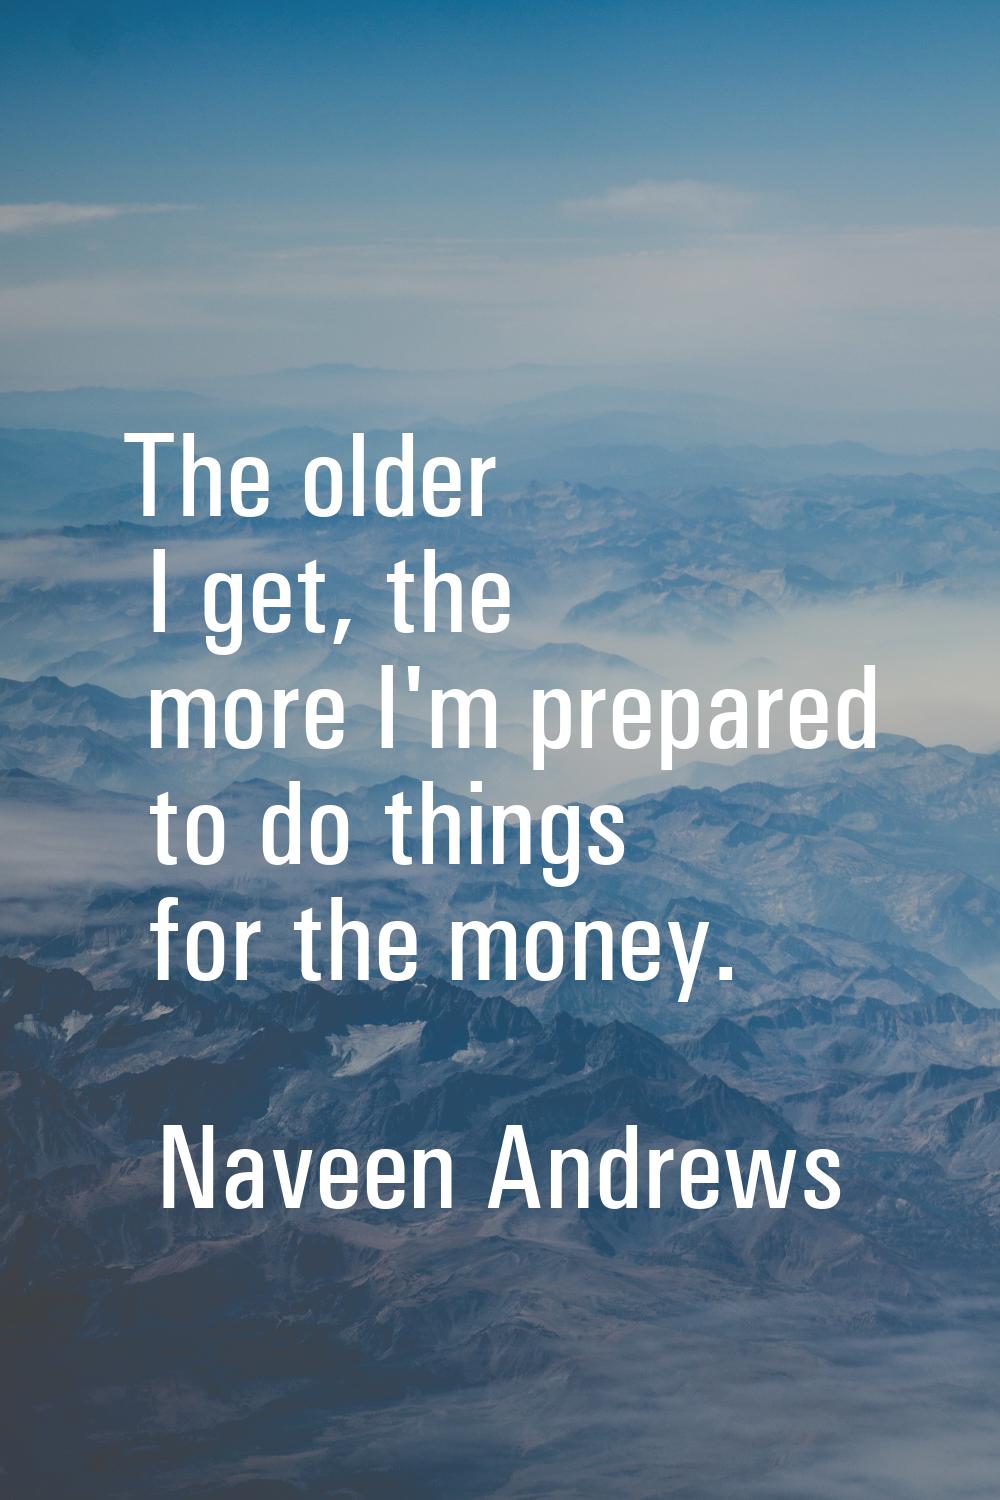 The older I get, the more I'm prepared to do things for the money.